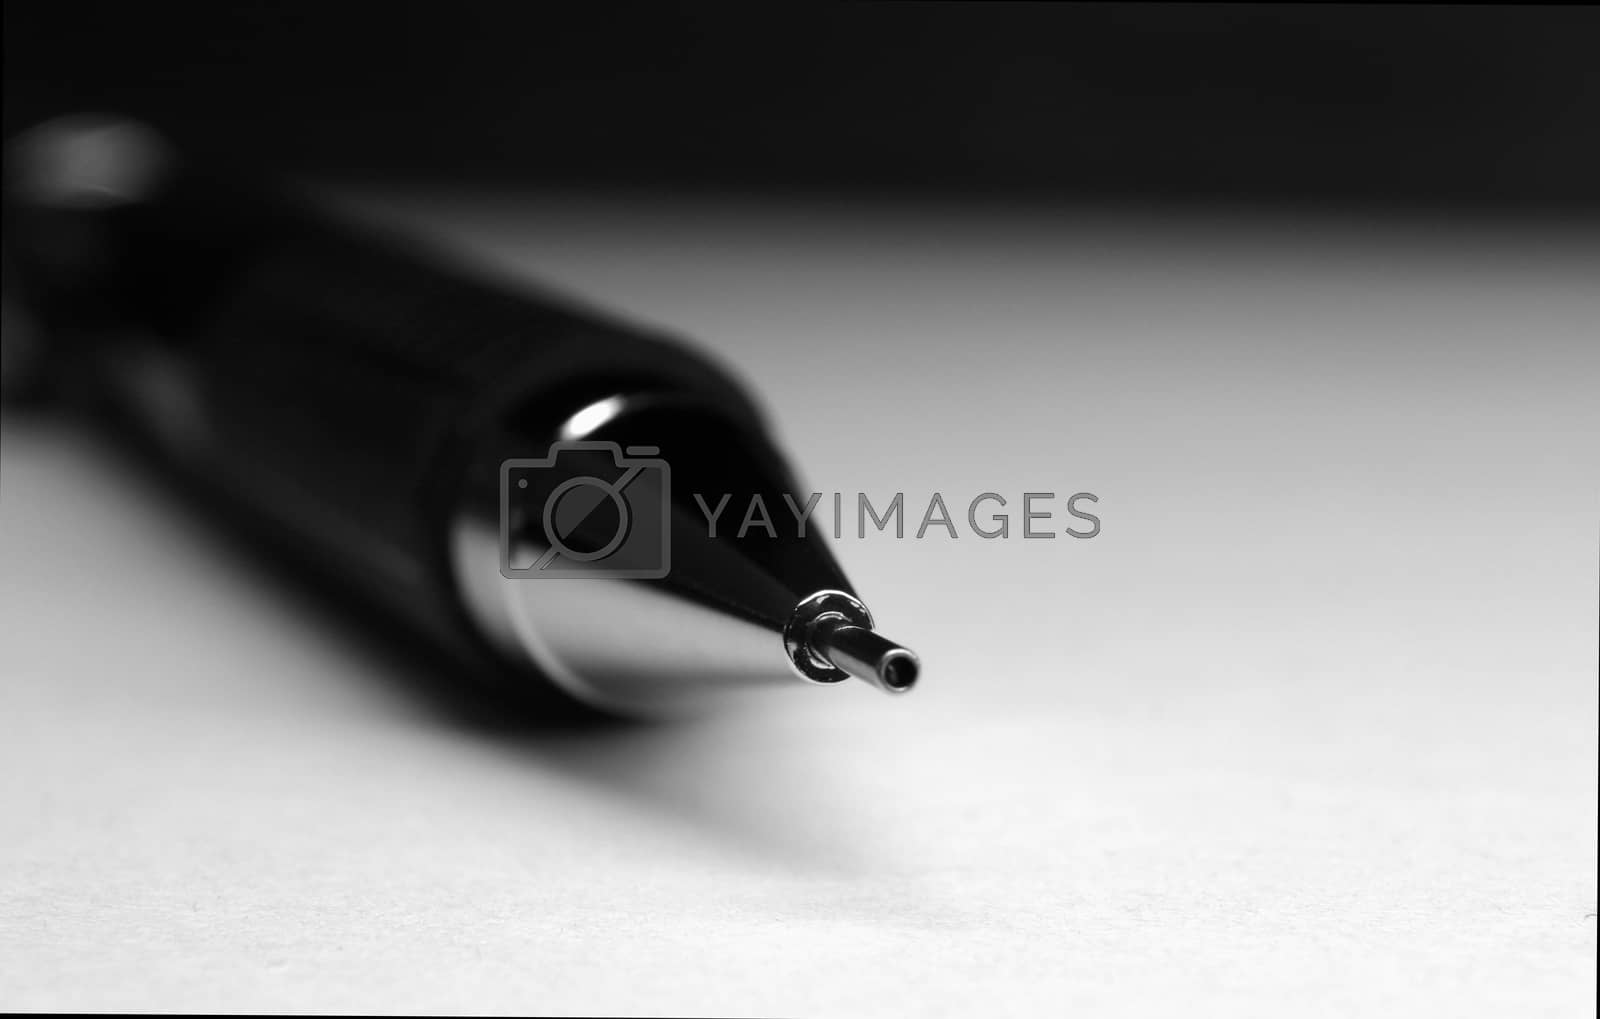 Royalty free image of mechanical business pencil close up by TravisPhotoWorks